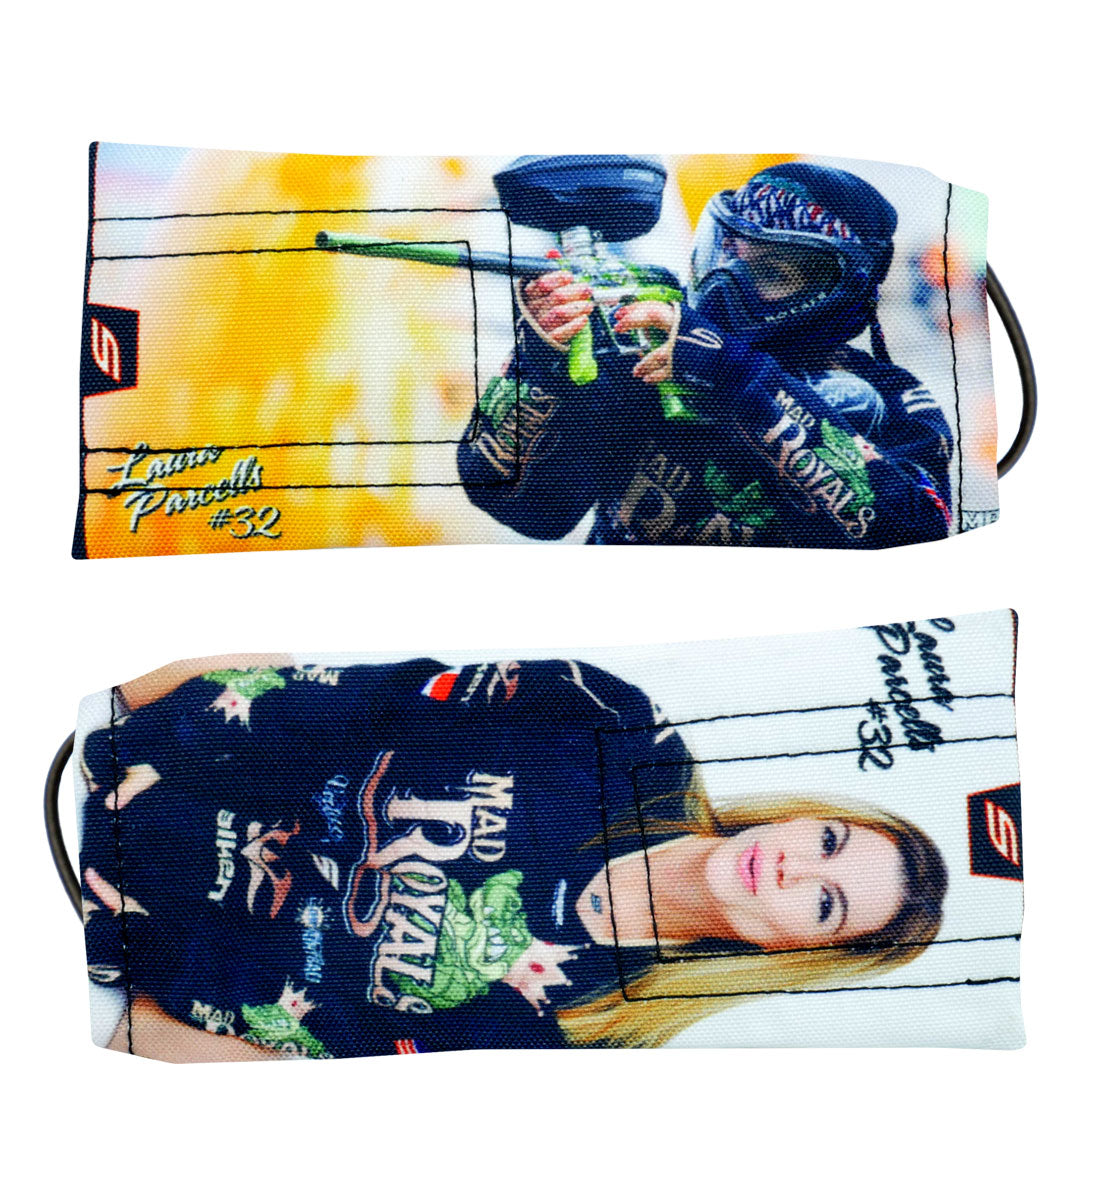 Barrel Cover, Laura Parcells, No. 2 – Mad Royals, Paintball Girls Series